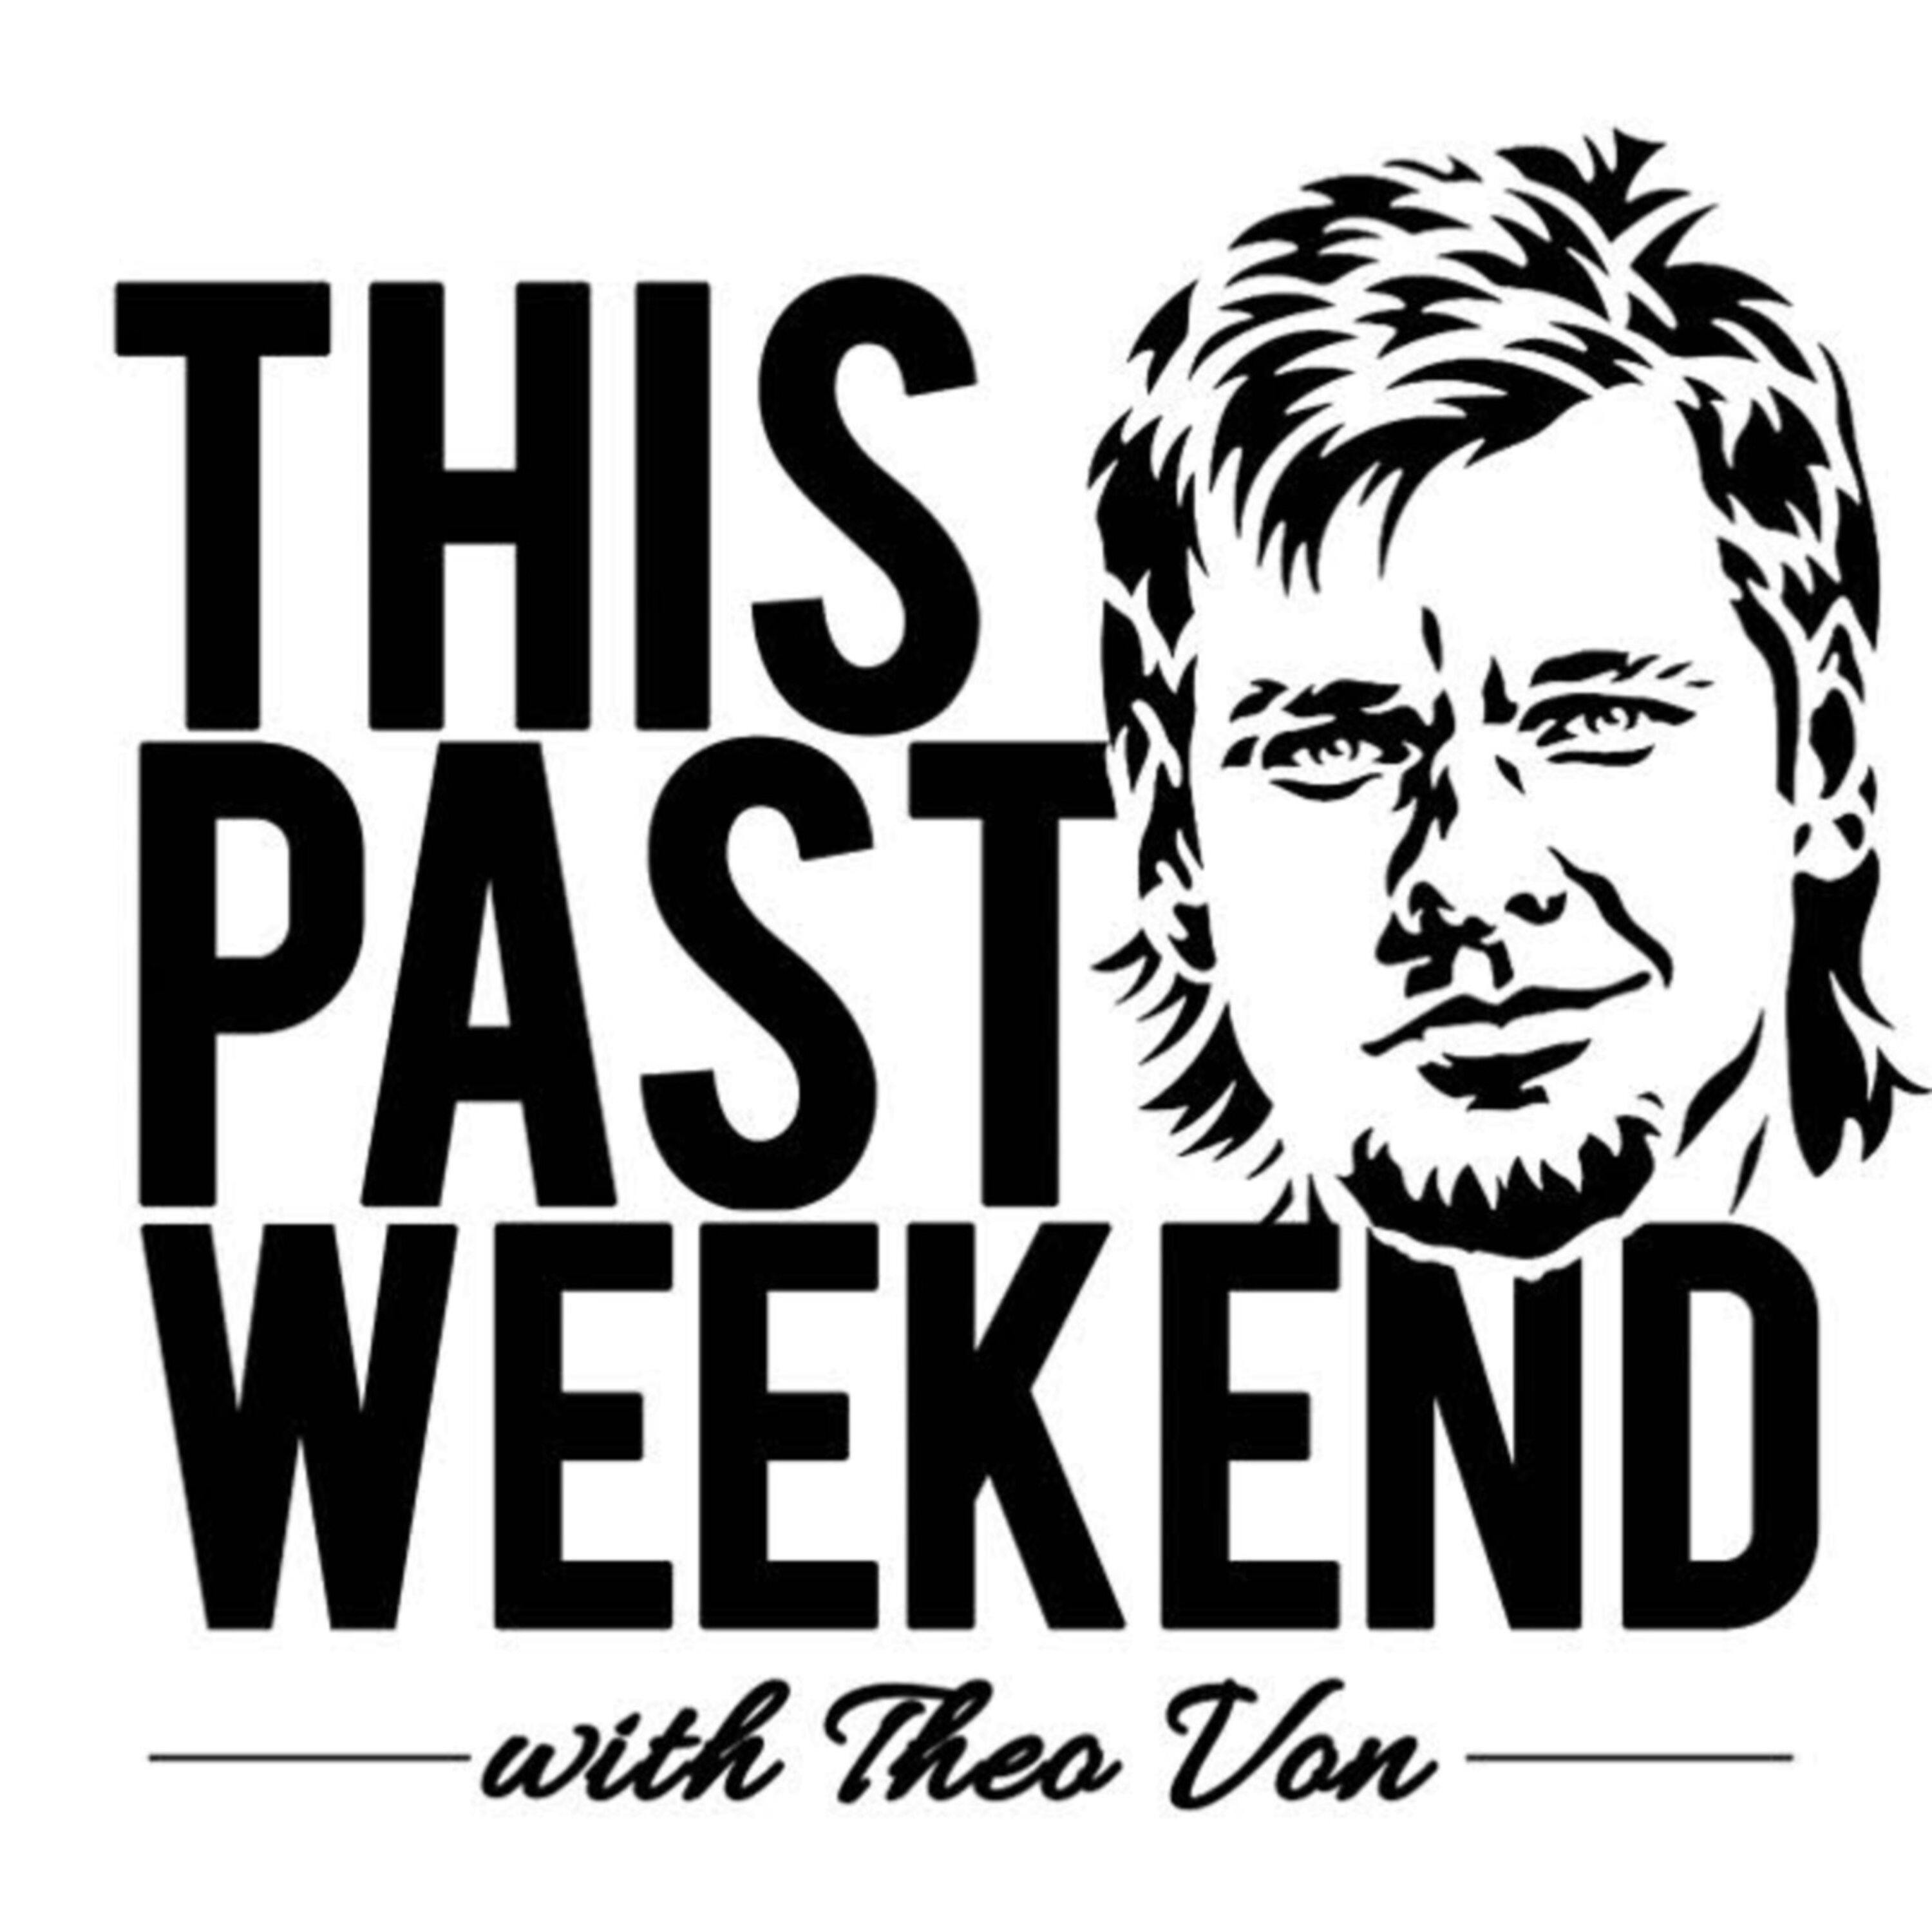 Maurice Clarett, Cory Gregory, and John Fosco | This Past Weekend #140 by Theo Von